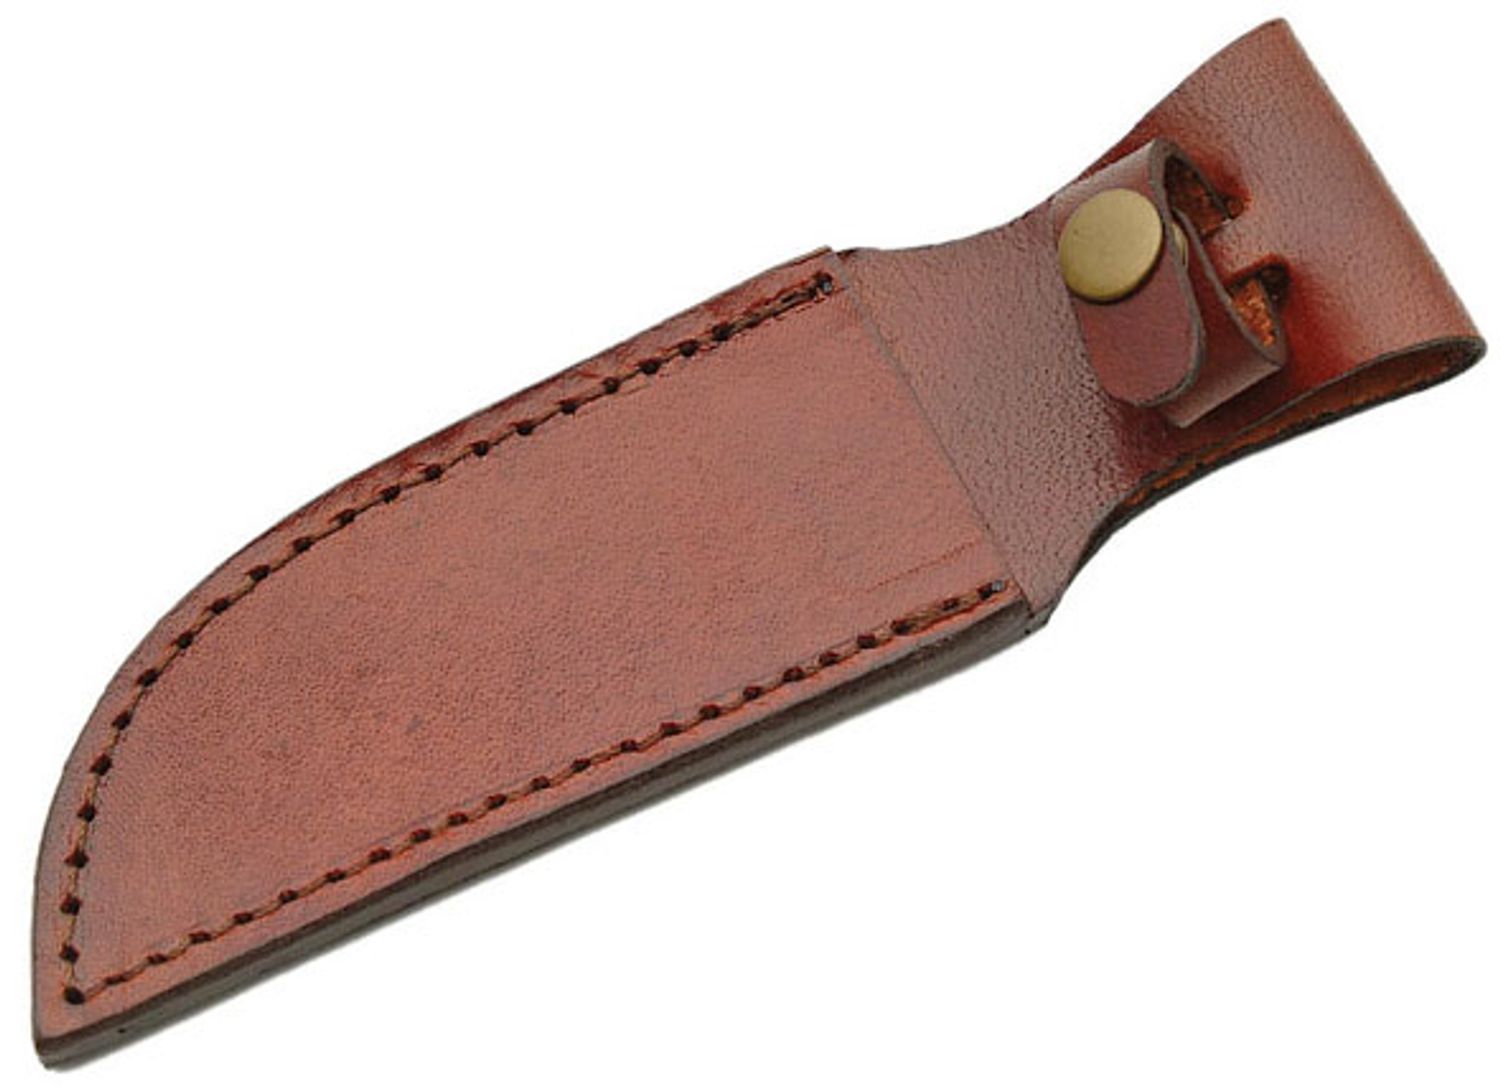 Leather sheath for 4-5in blades